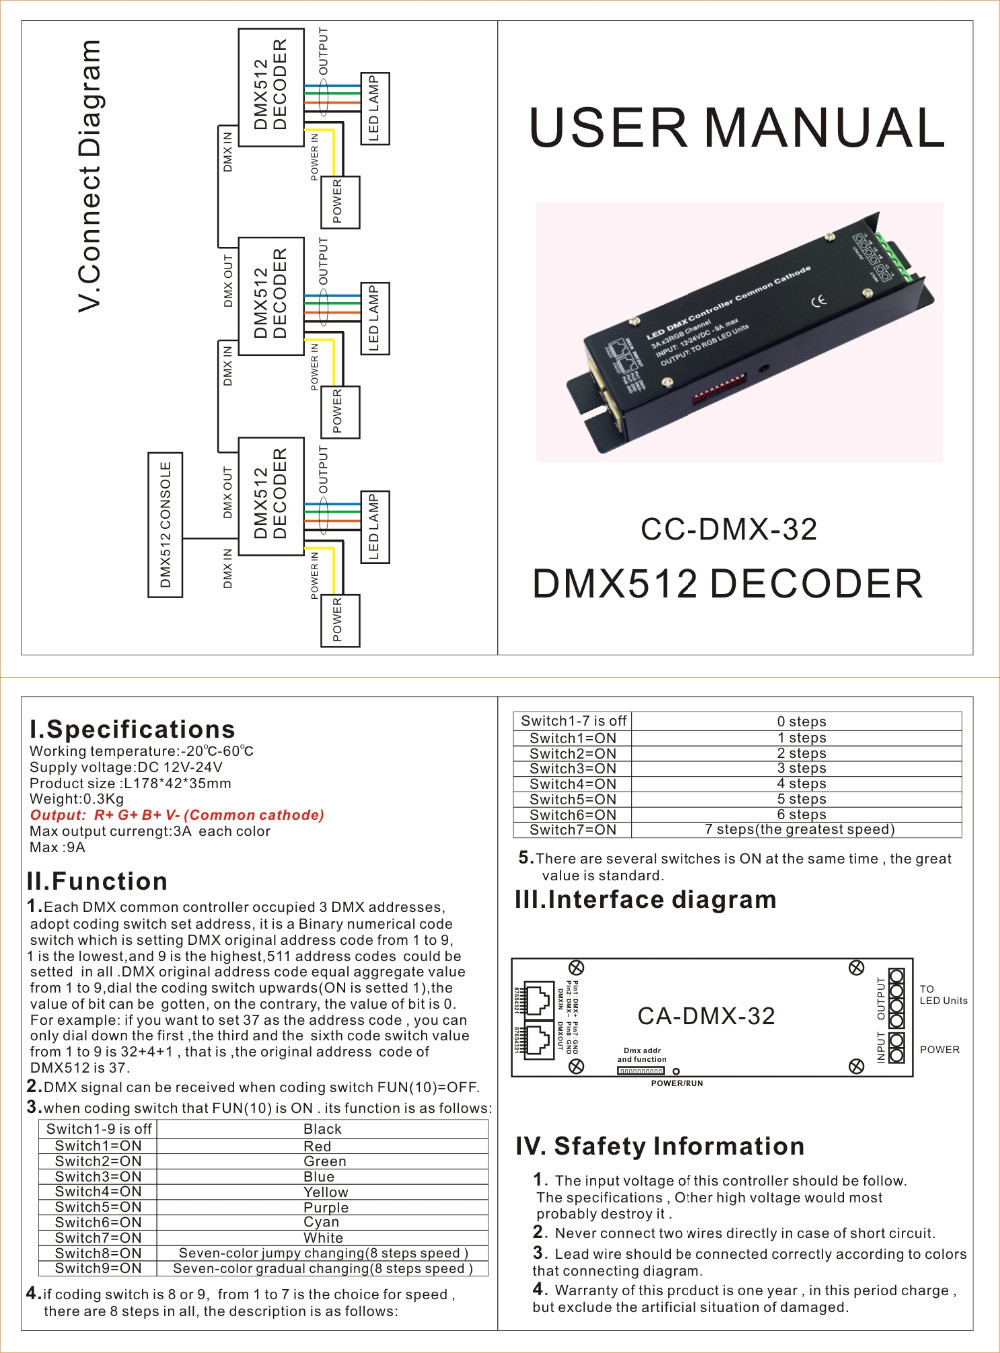 DMX_Controllers_and_Decoders_WS_CC_DMX_32_2